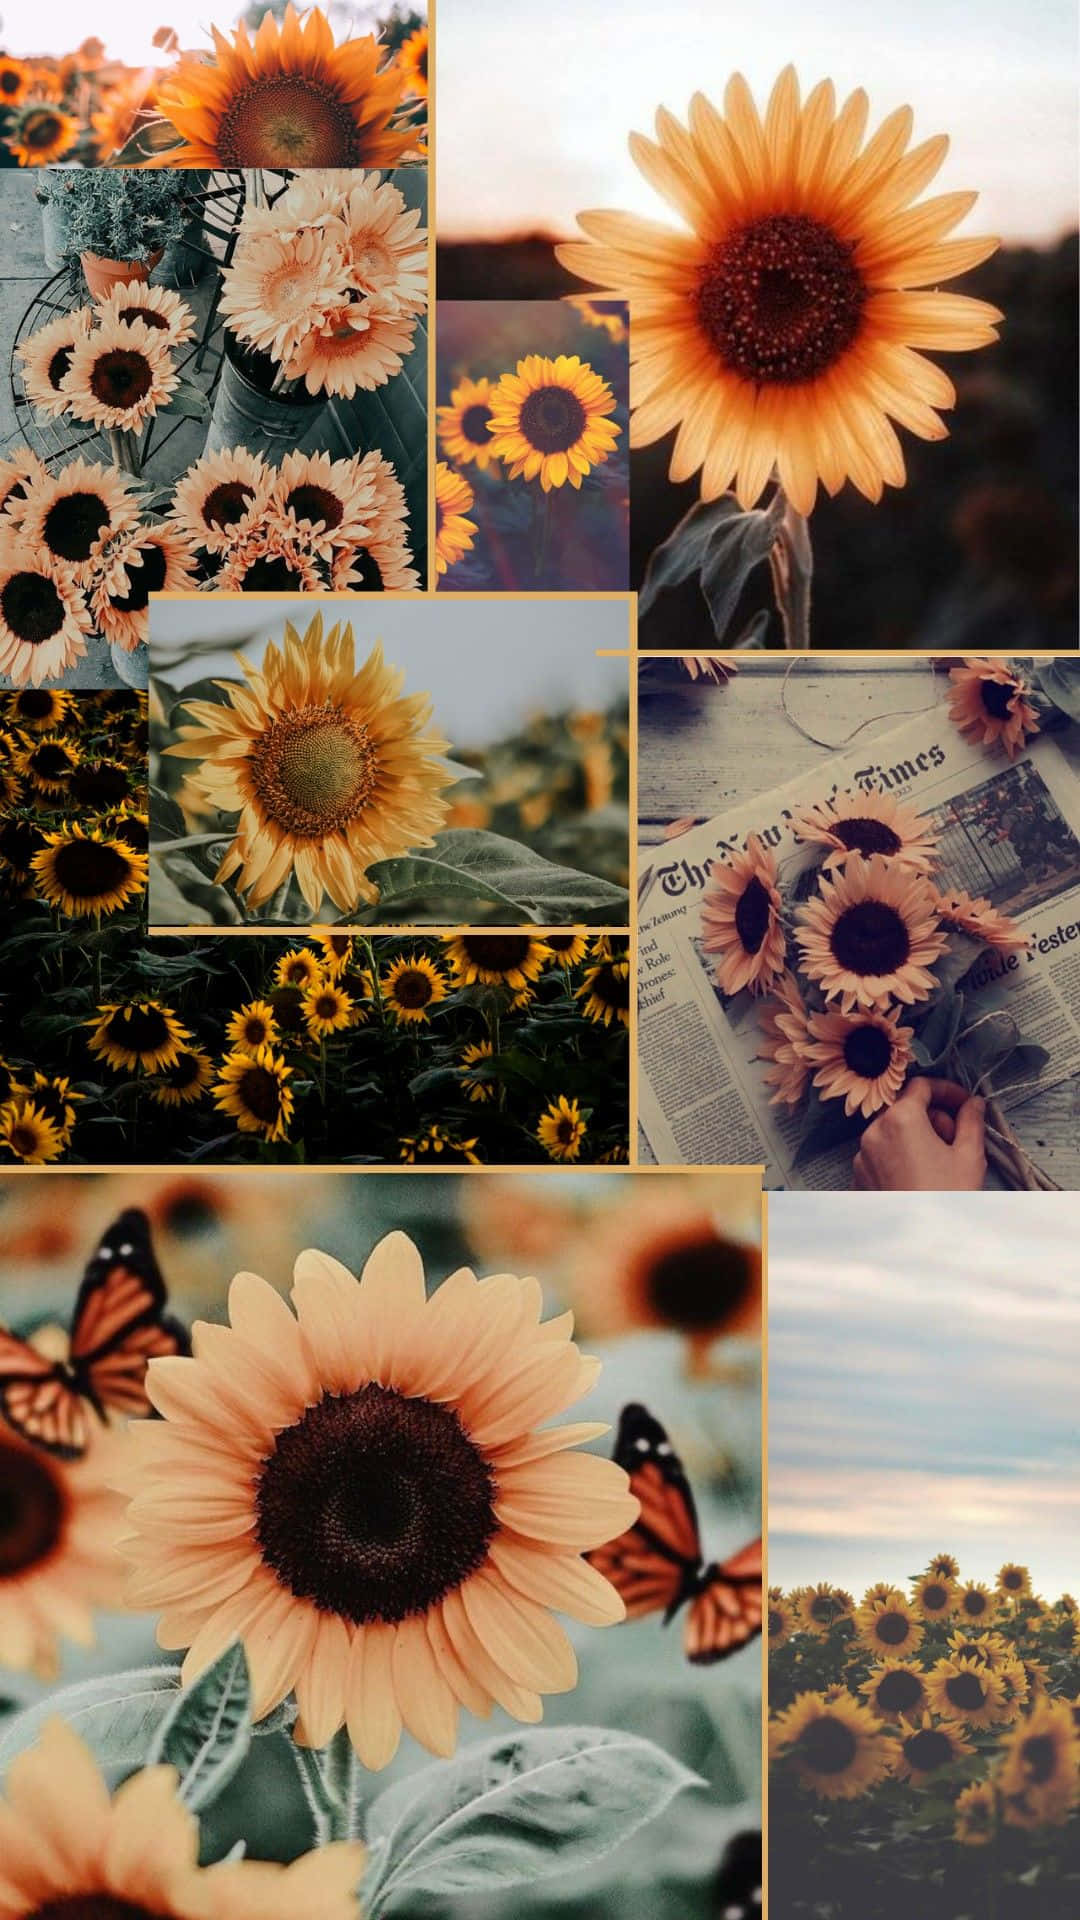 An Aesthetic Sunset with a Vibrant Sunflower